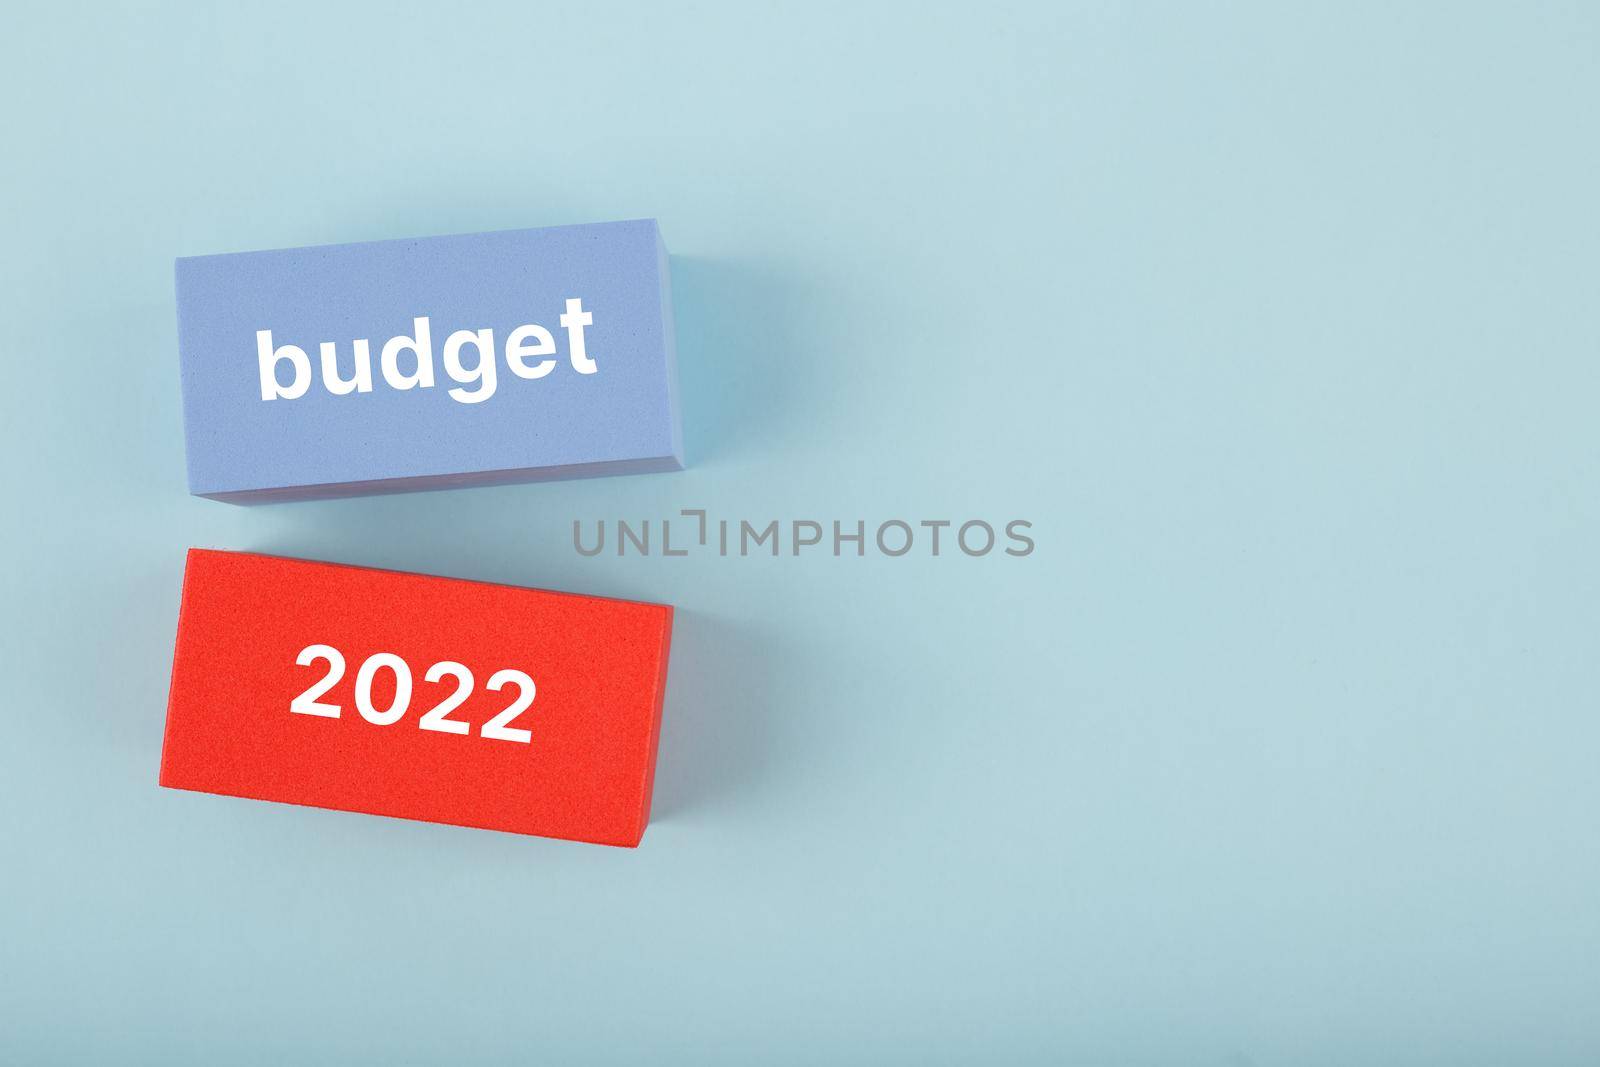 Business plan or budget concept 2022. Text budget 2022 written on red and blue rectangles on bright blue background with copy space by Senorina_Irina